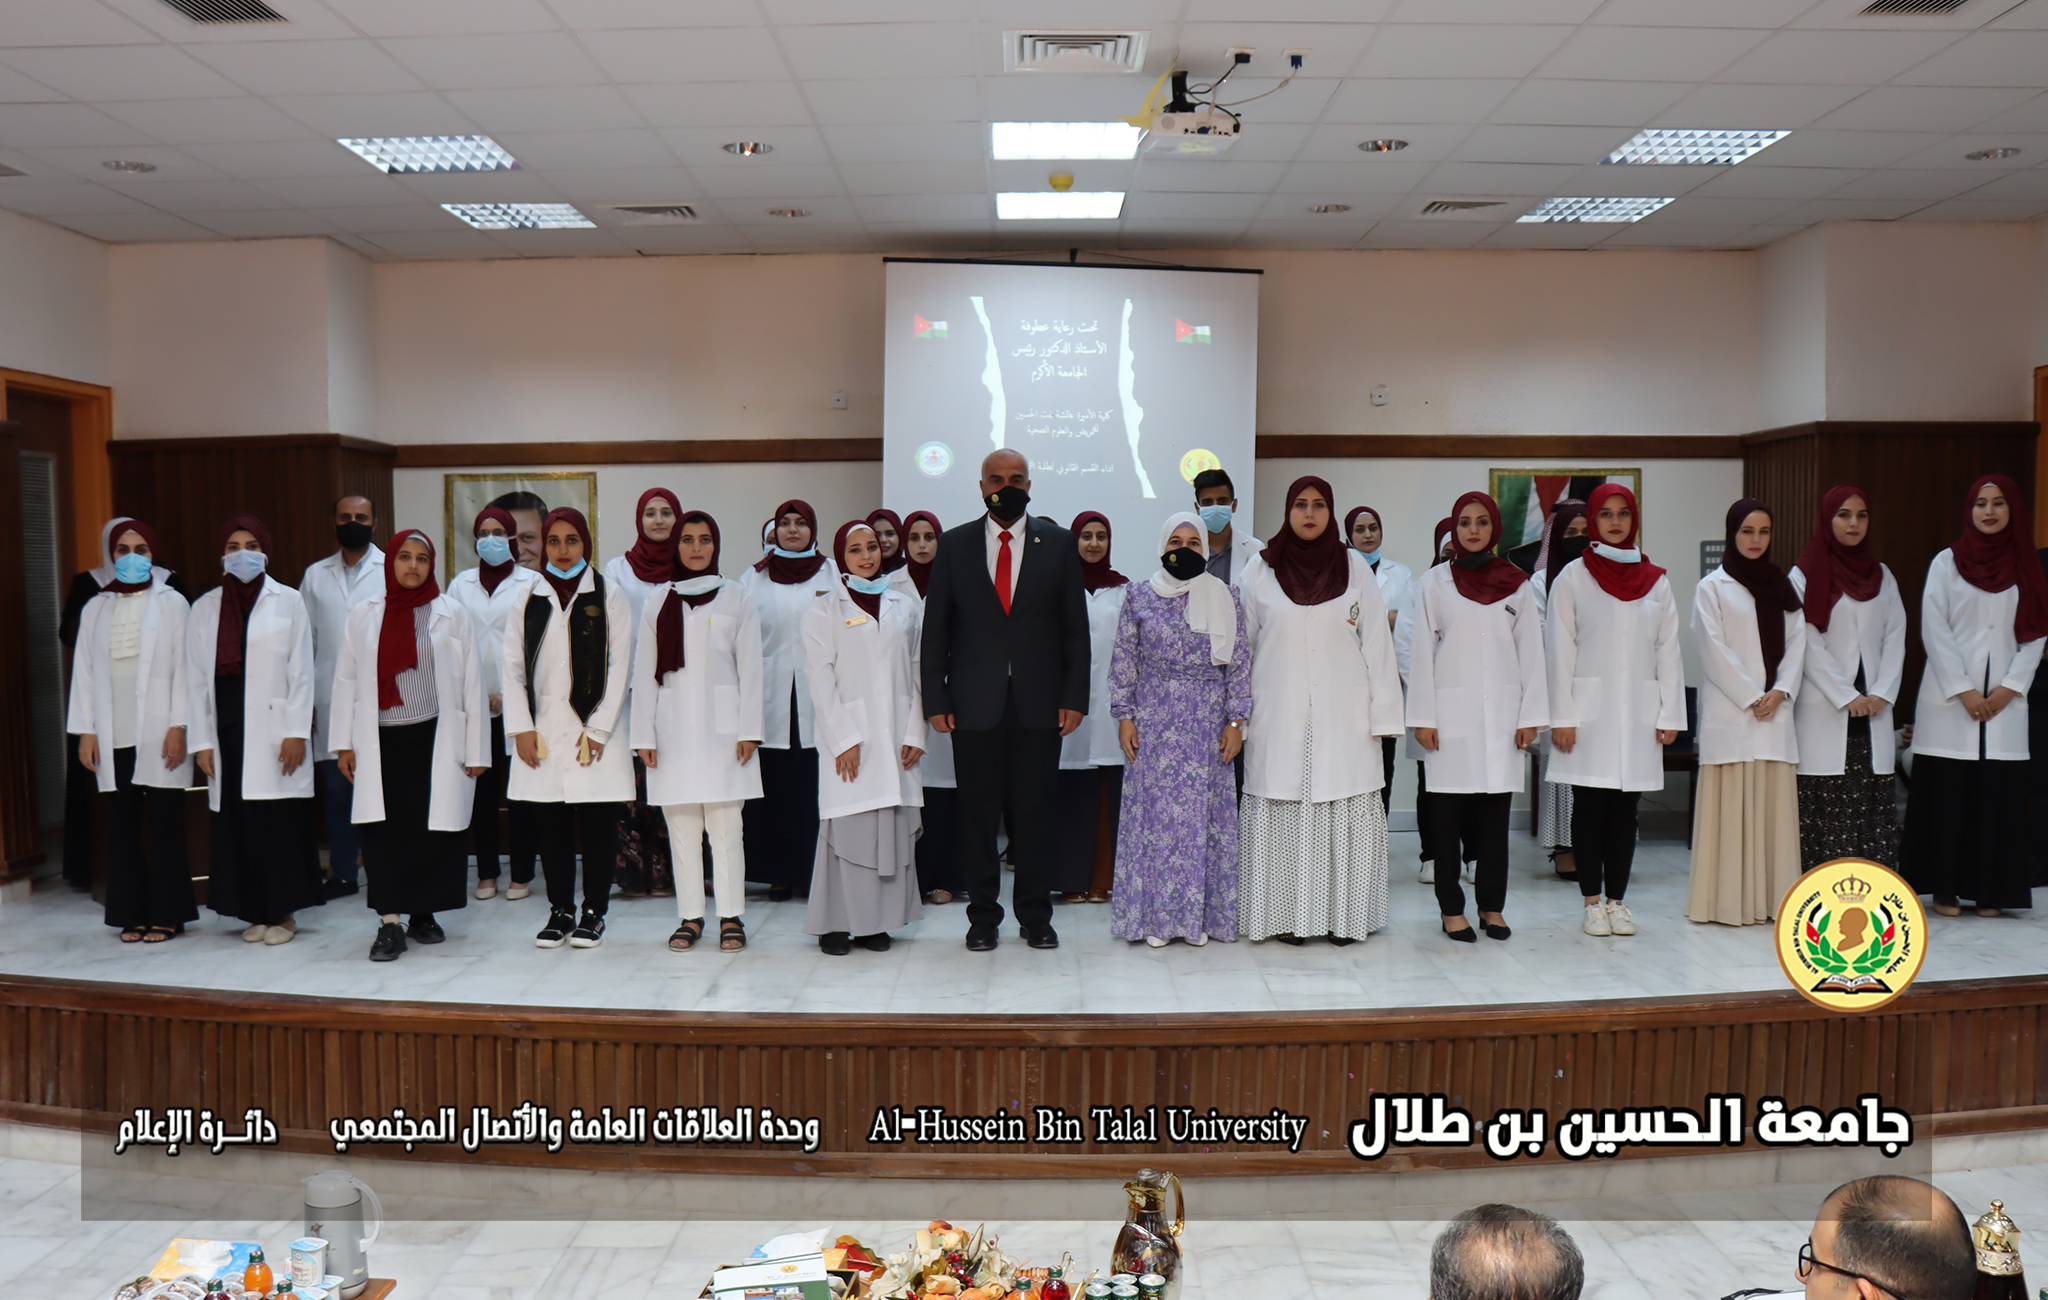 Performing the legal oath for graduate nursing students at the university